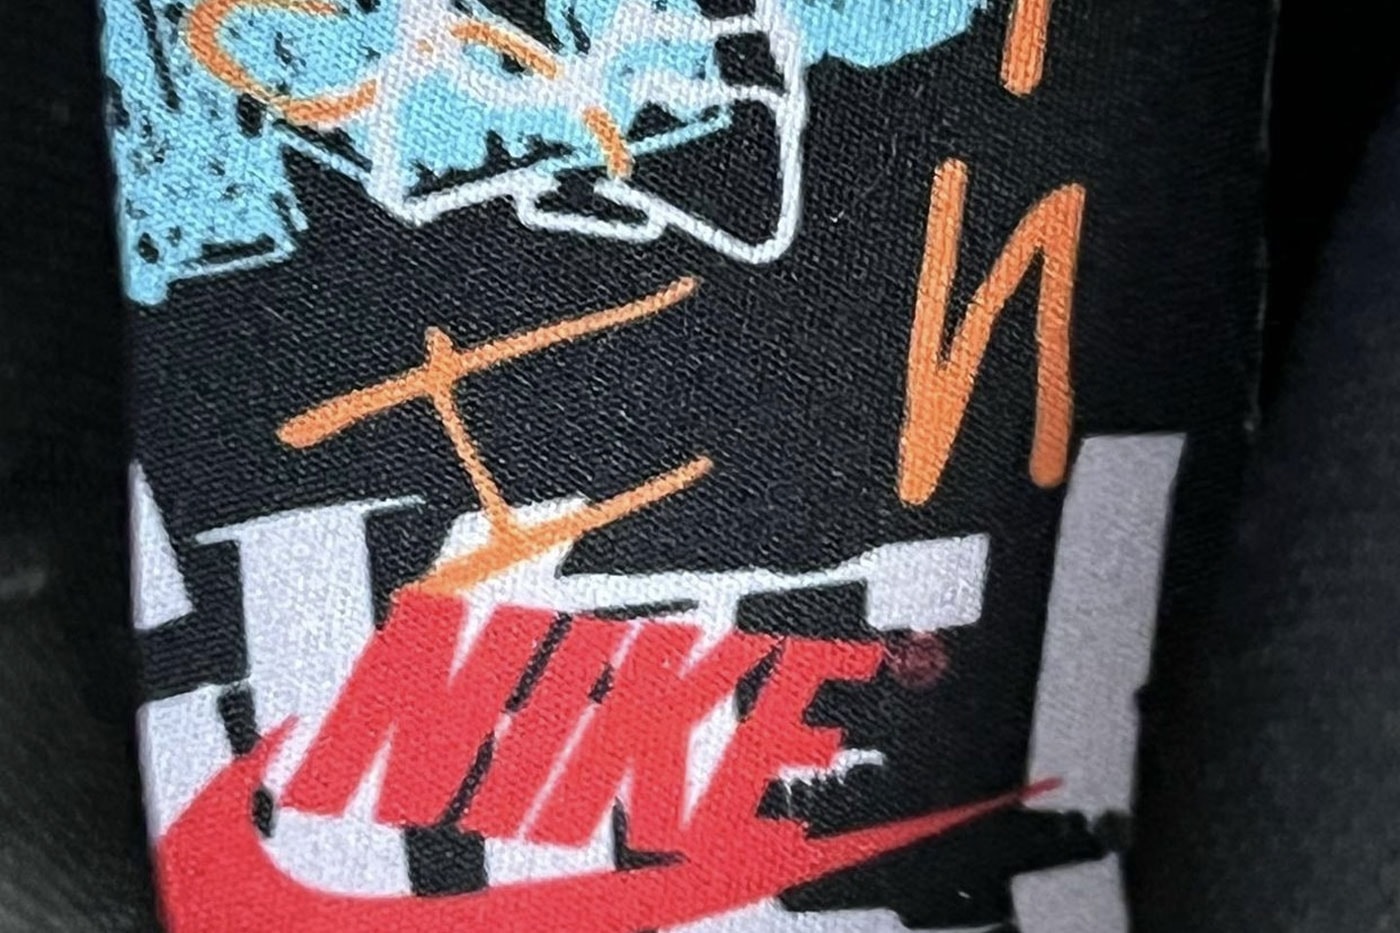 Nike Dunk Low Graffiti First Look Price Release Date